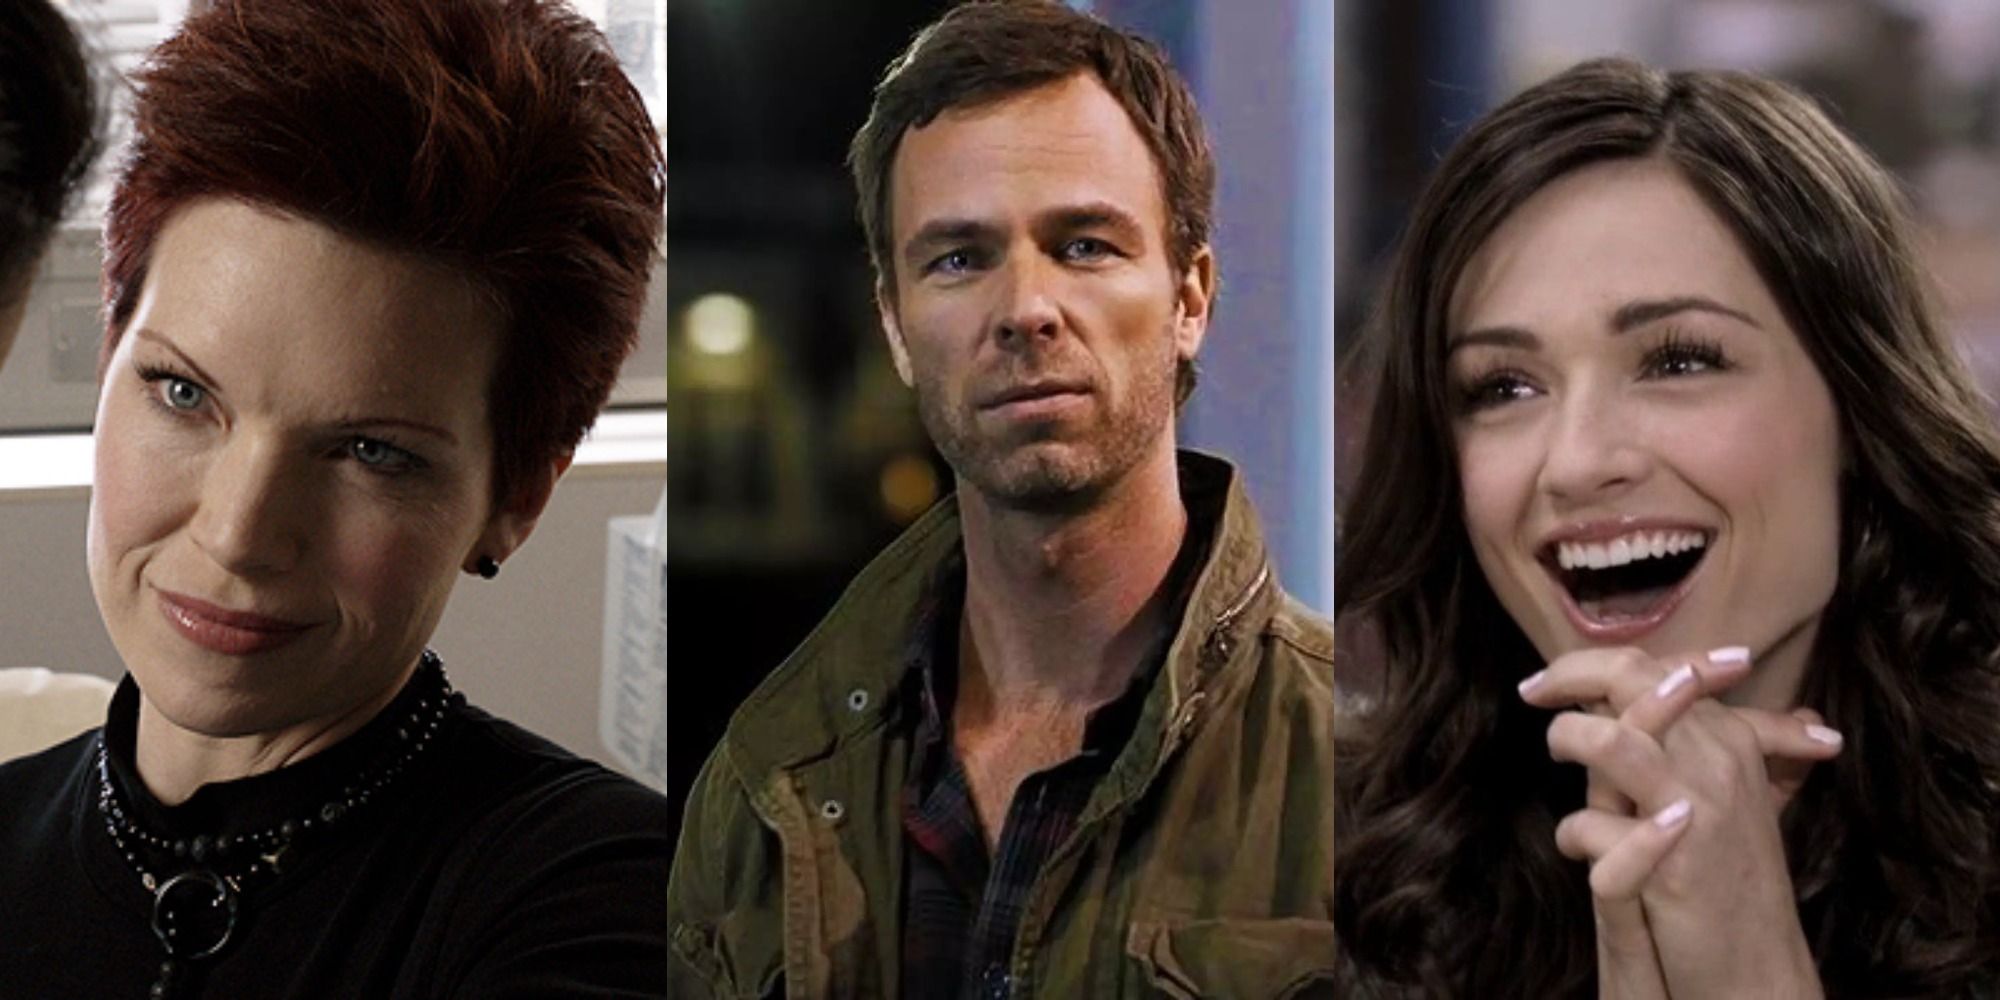 A split image of Victoria, Chris, and Allison Argent in Teen Wolf